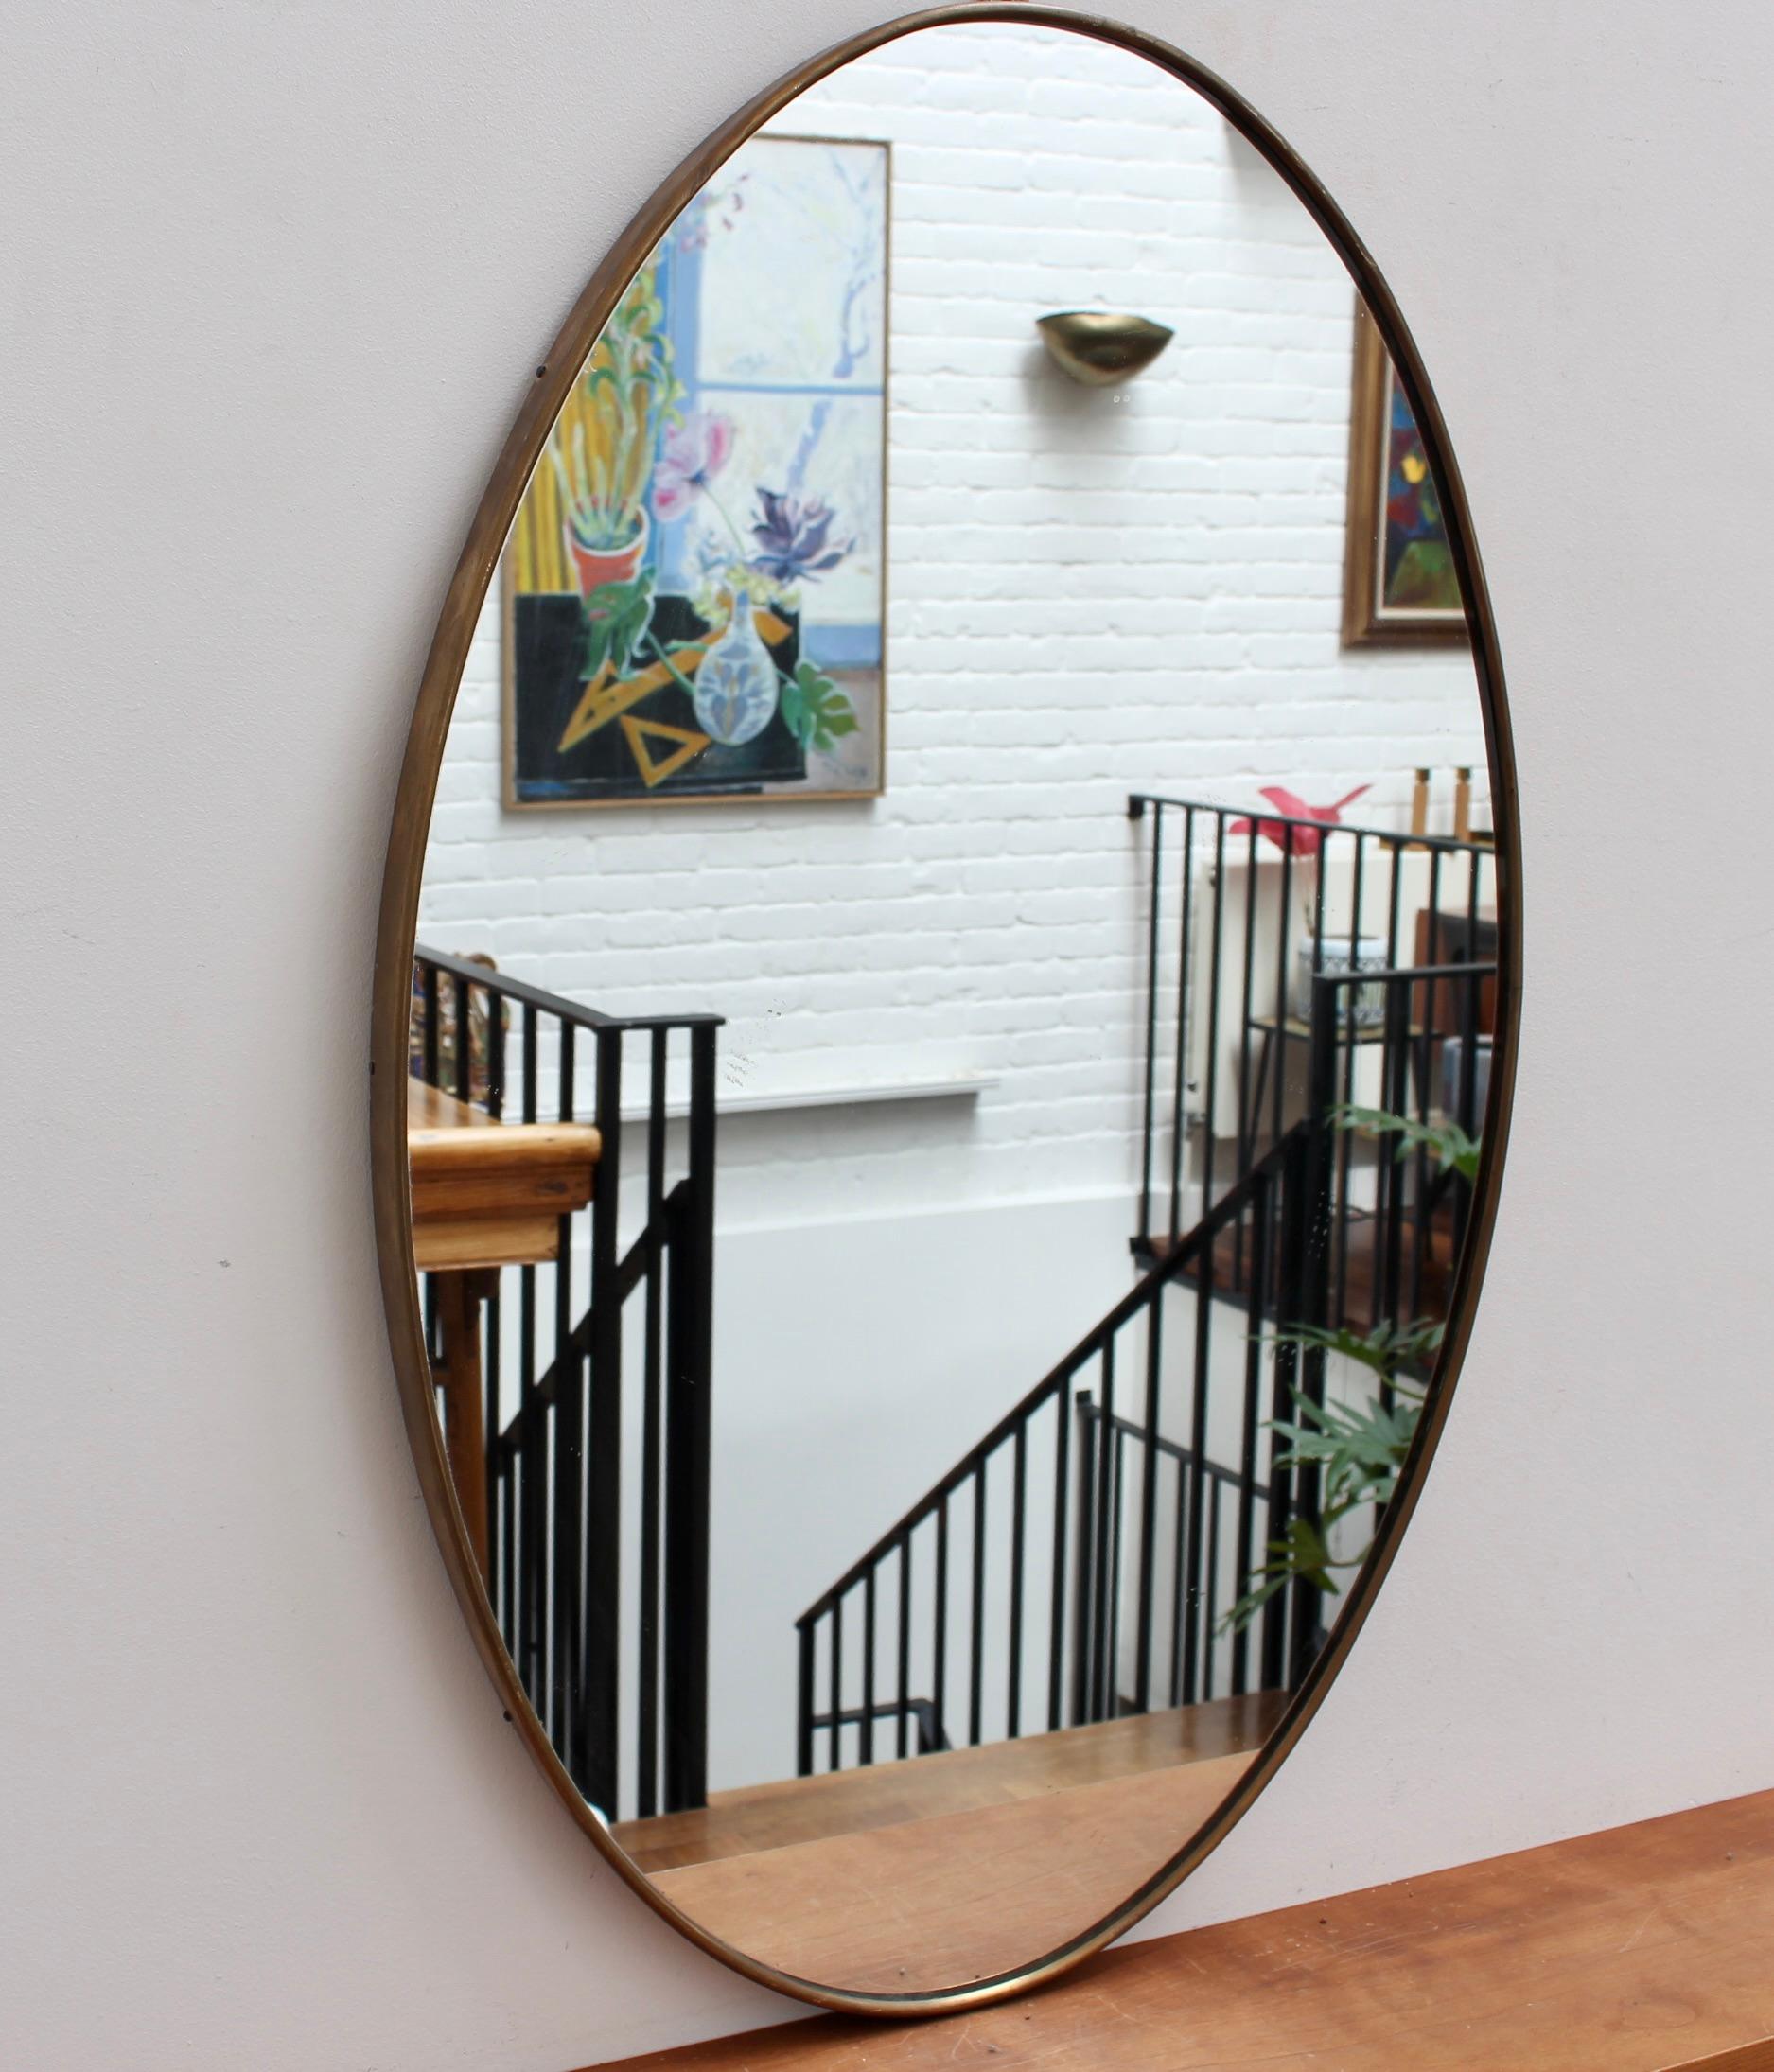 Mid-century Italian wall mirror with brass frame (circa 1960s). The mirror is oval-shaped and distinctive in a Modern style. It is in good overall condition. A beautiful patina has developed on the brass frame. There are some minor blemishes on the